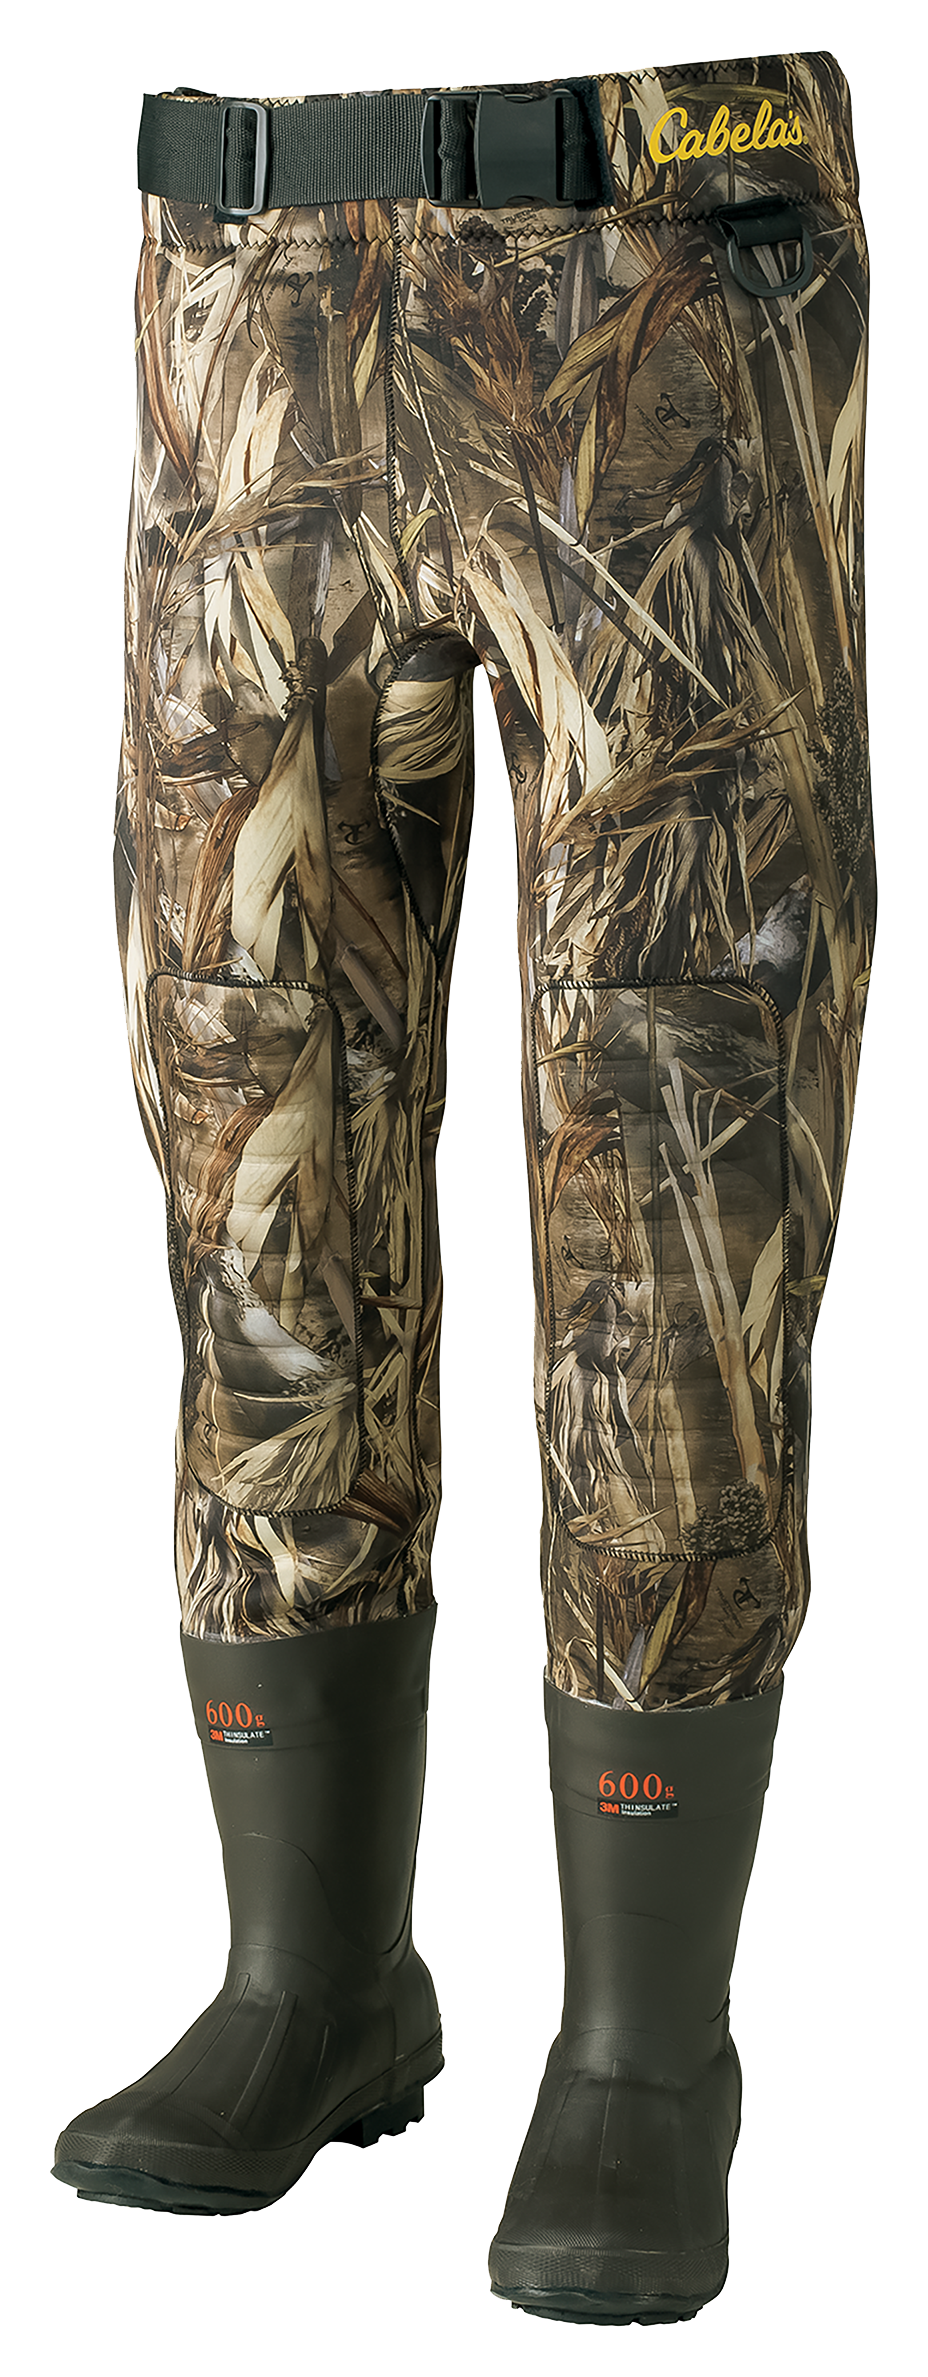 Fly Fishing Chest Waders No Boots 4-Ply Waterproof ATV&UTV Mud Riding  Saltwater Wading Pants for